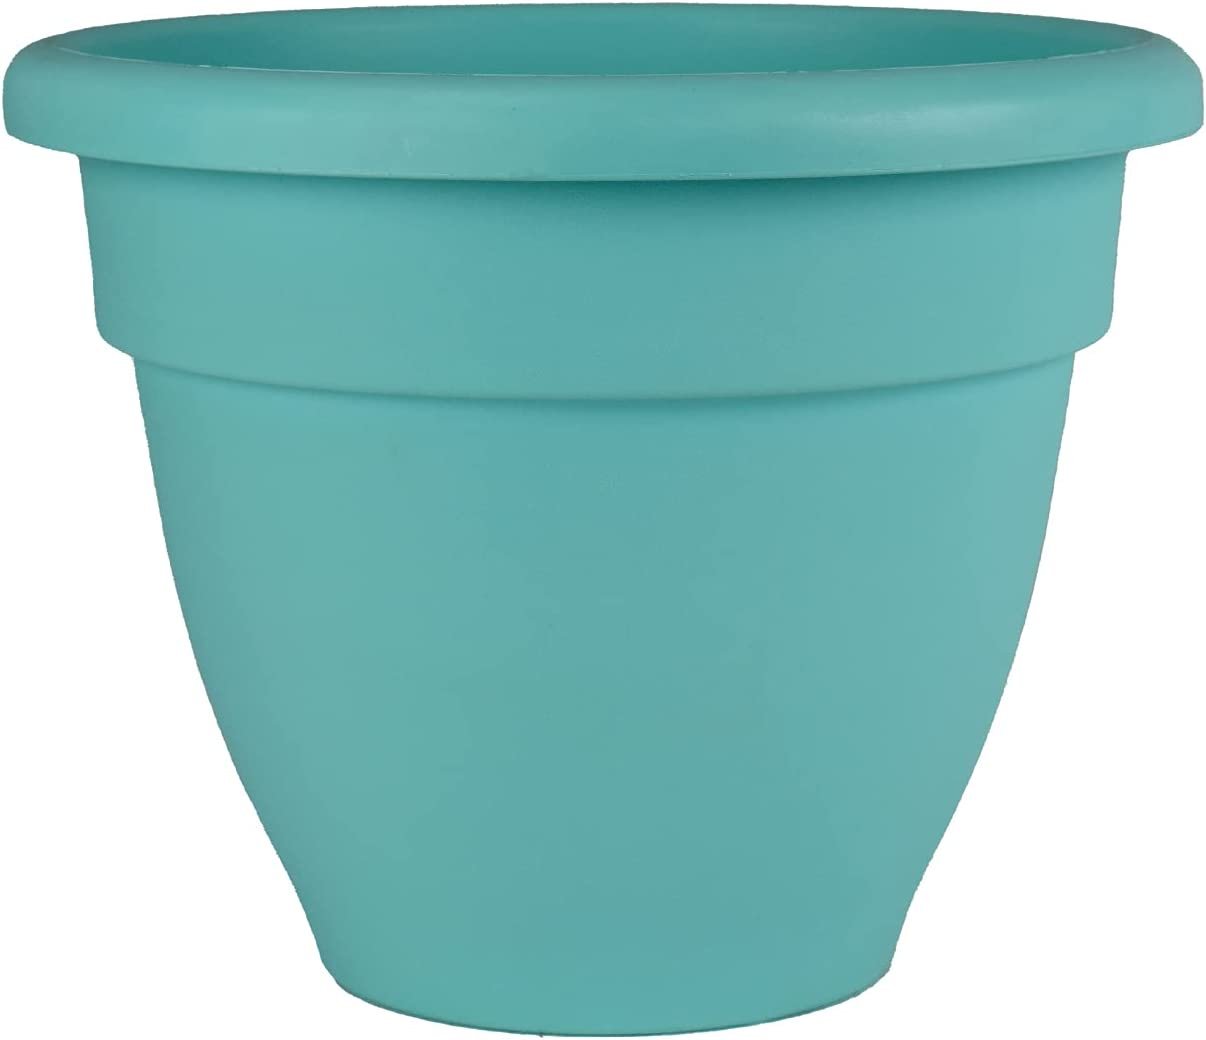 The HC Companies 6 Inch Caribbean Round Planter Lightweight Indoor Outdoor with Drainage Plug